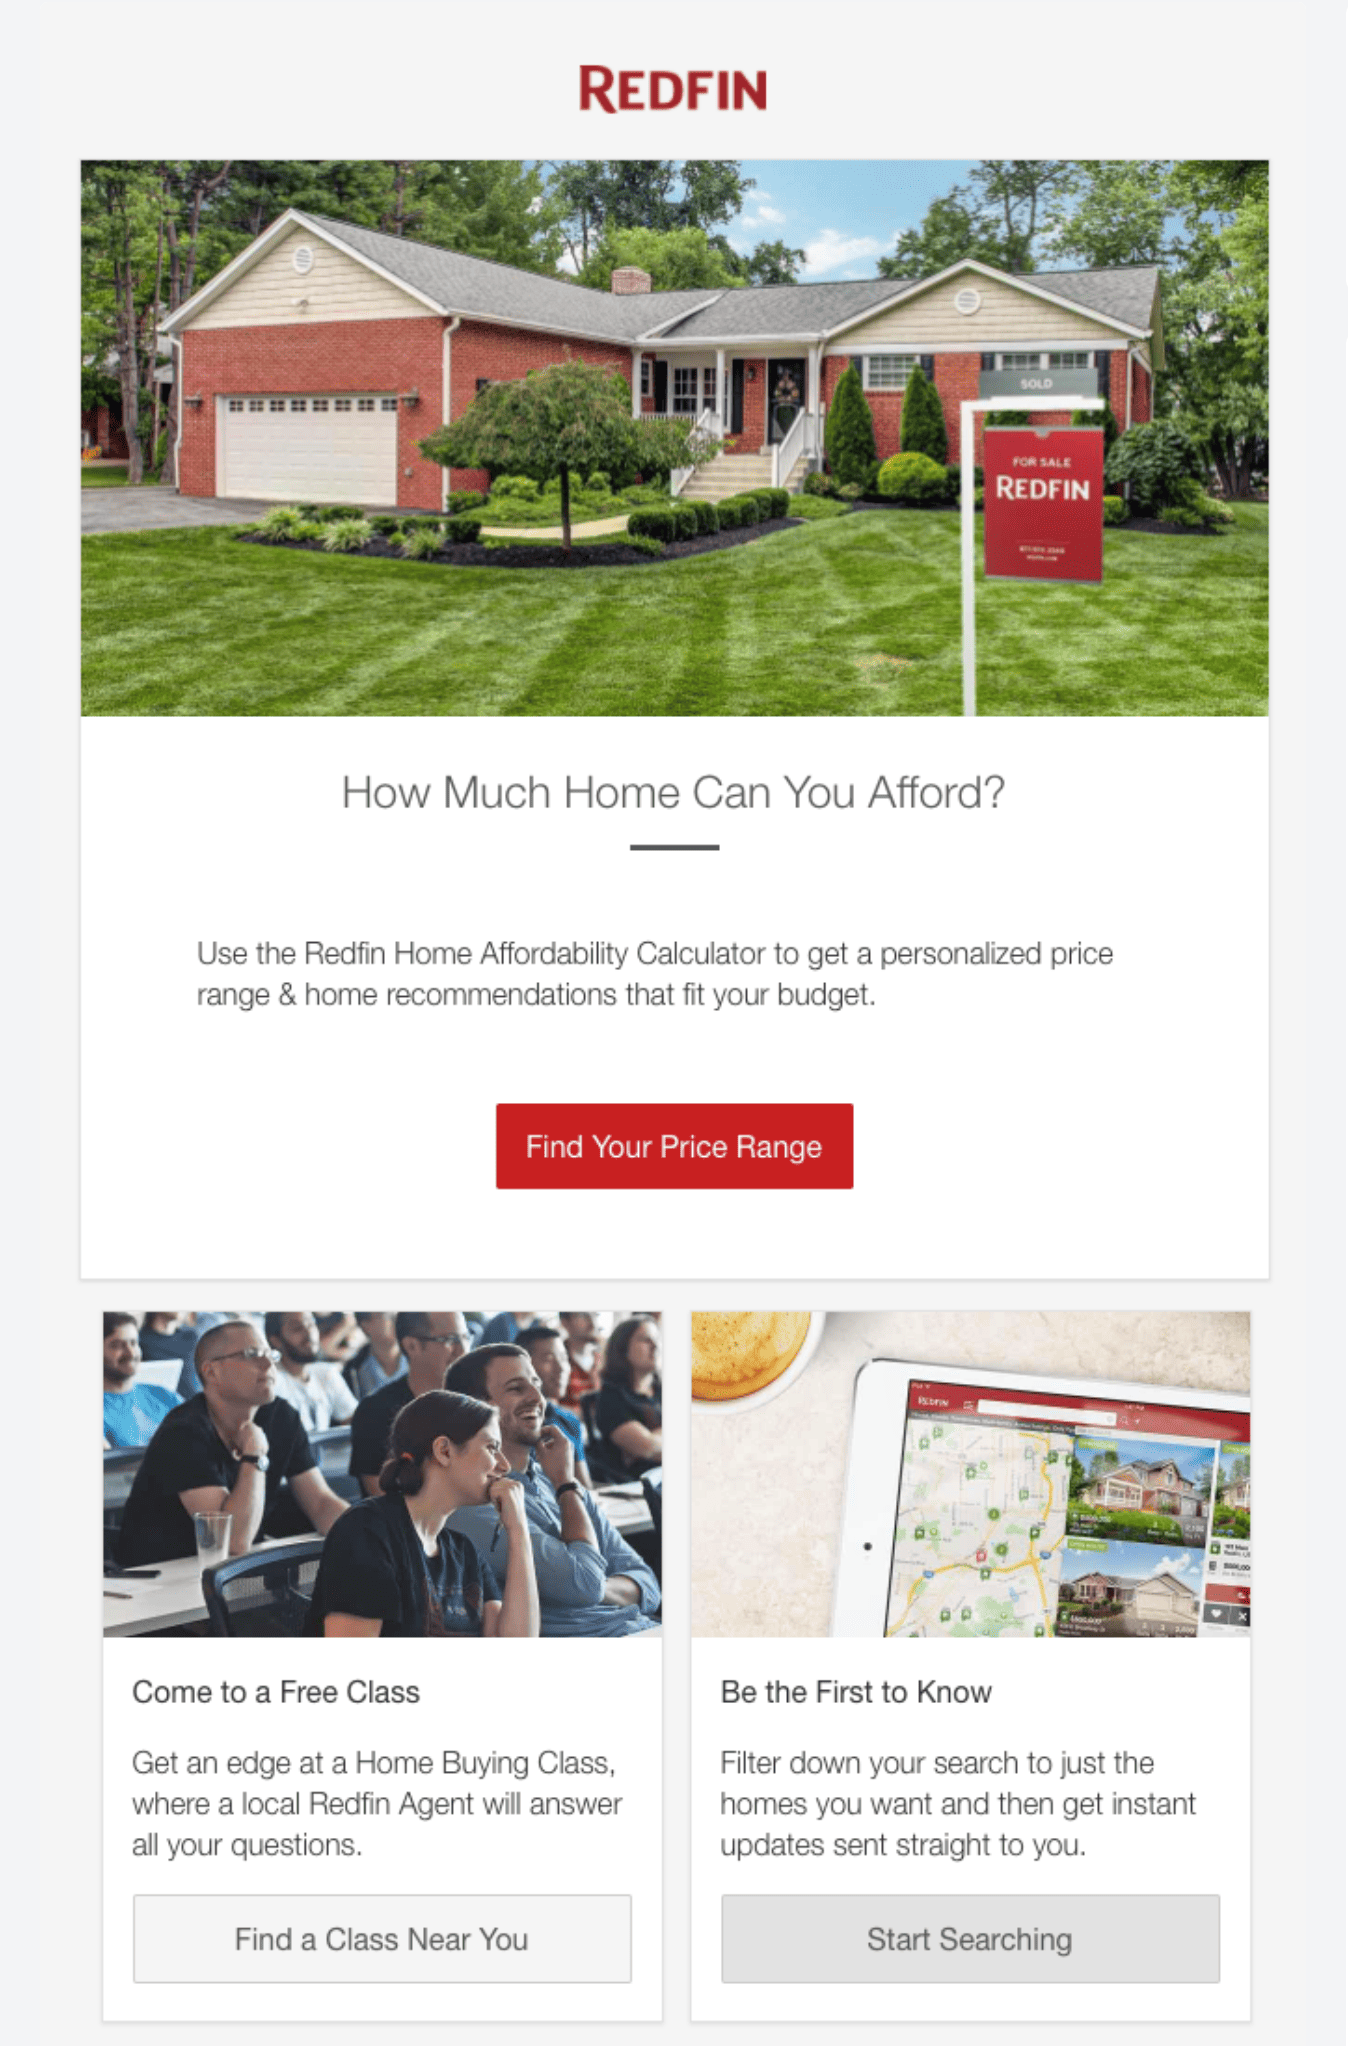 Sample real estate email from Redfin